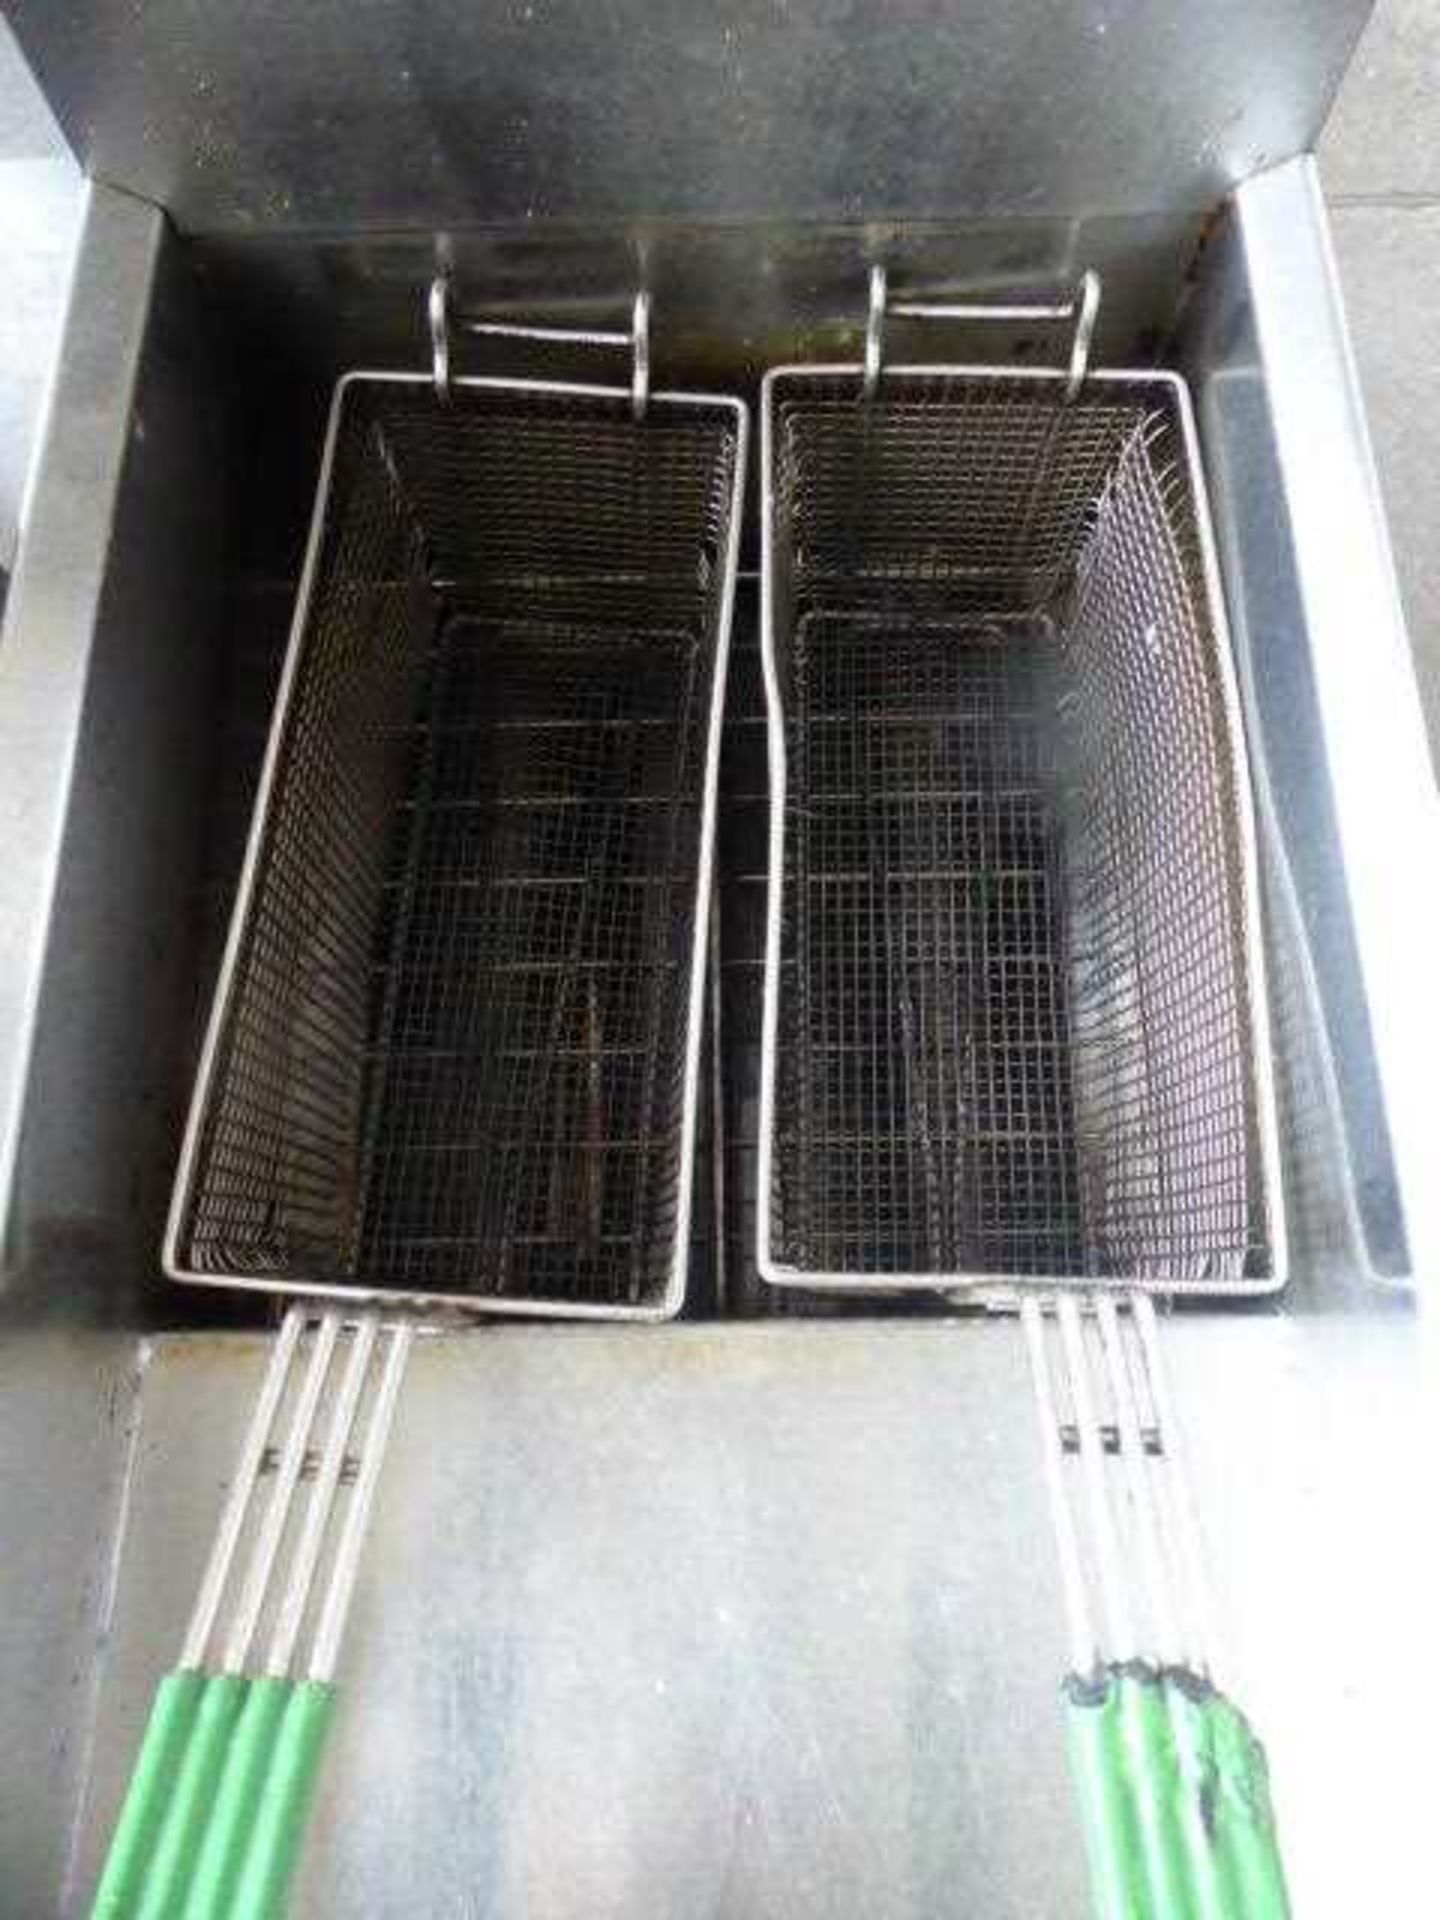 40cm gas Dean single well fryer with 2 baskets - Image 2 of 2